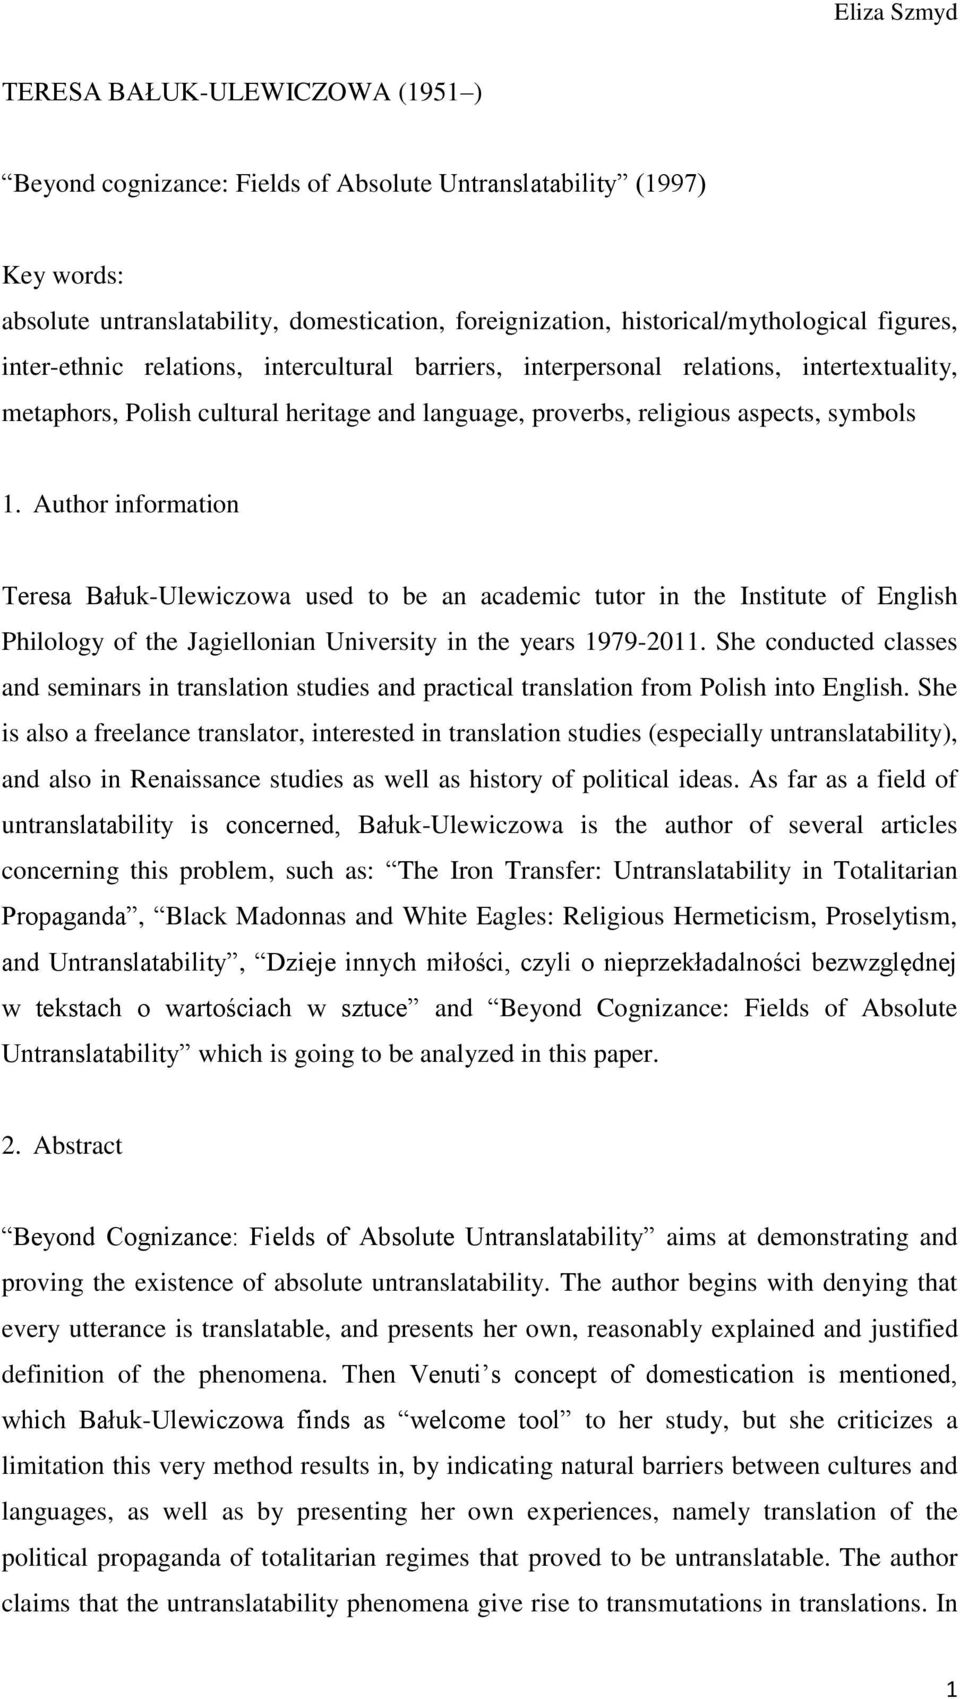 Author information Teresa Bałuk-Ulewiczowa used to be an academic tutor in the Institute of English Philology of the Jagiellonian University in the years 1979-2011.